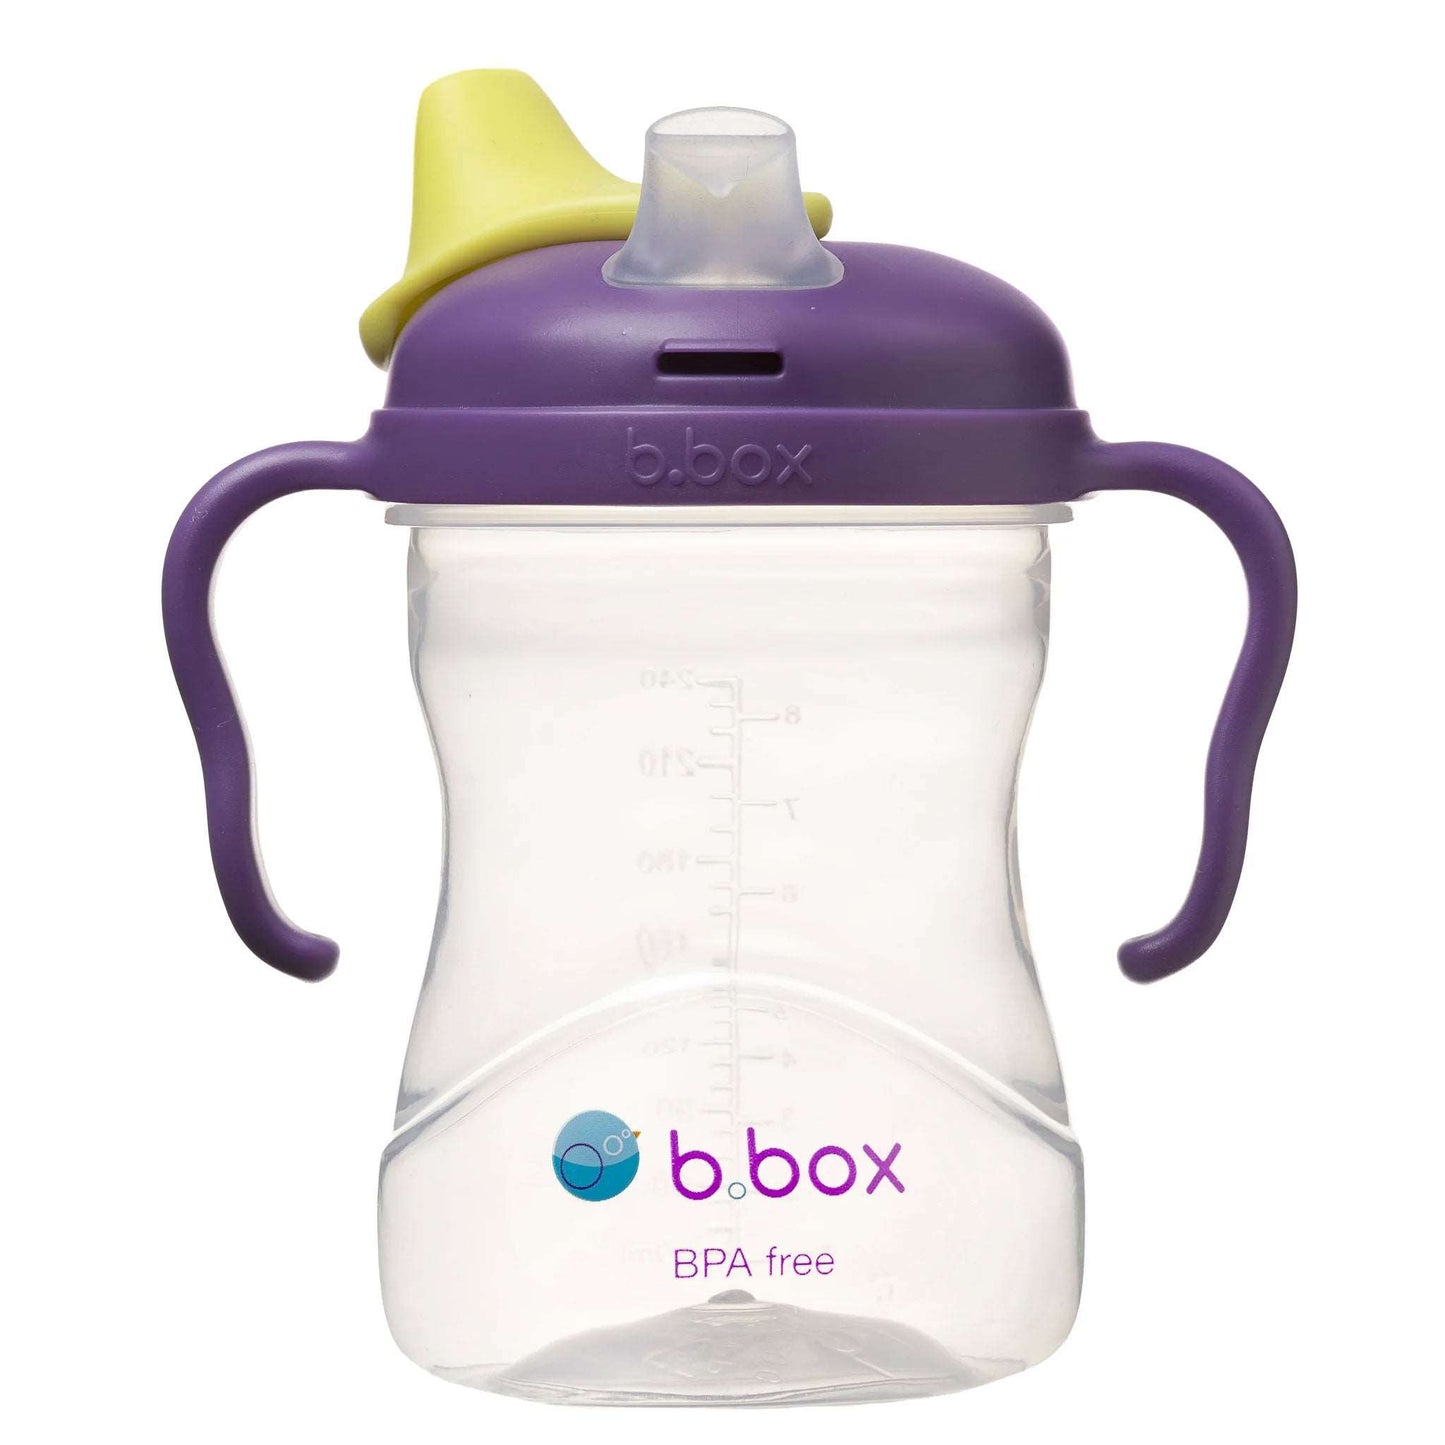 The b.box Spout Cup is a training cup that is the ideal way for kids to learn to drink from a cup. The training cup mimics the flow of a big kids cup, by funnelling liquids into the rim for easy free-flow drinking.